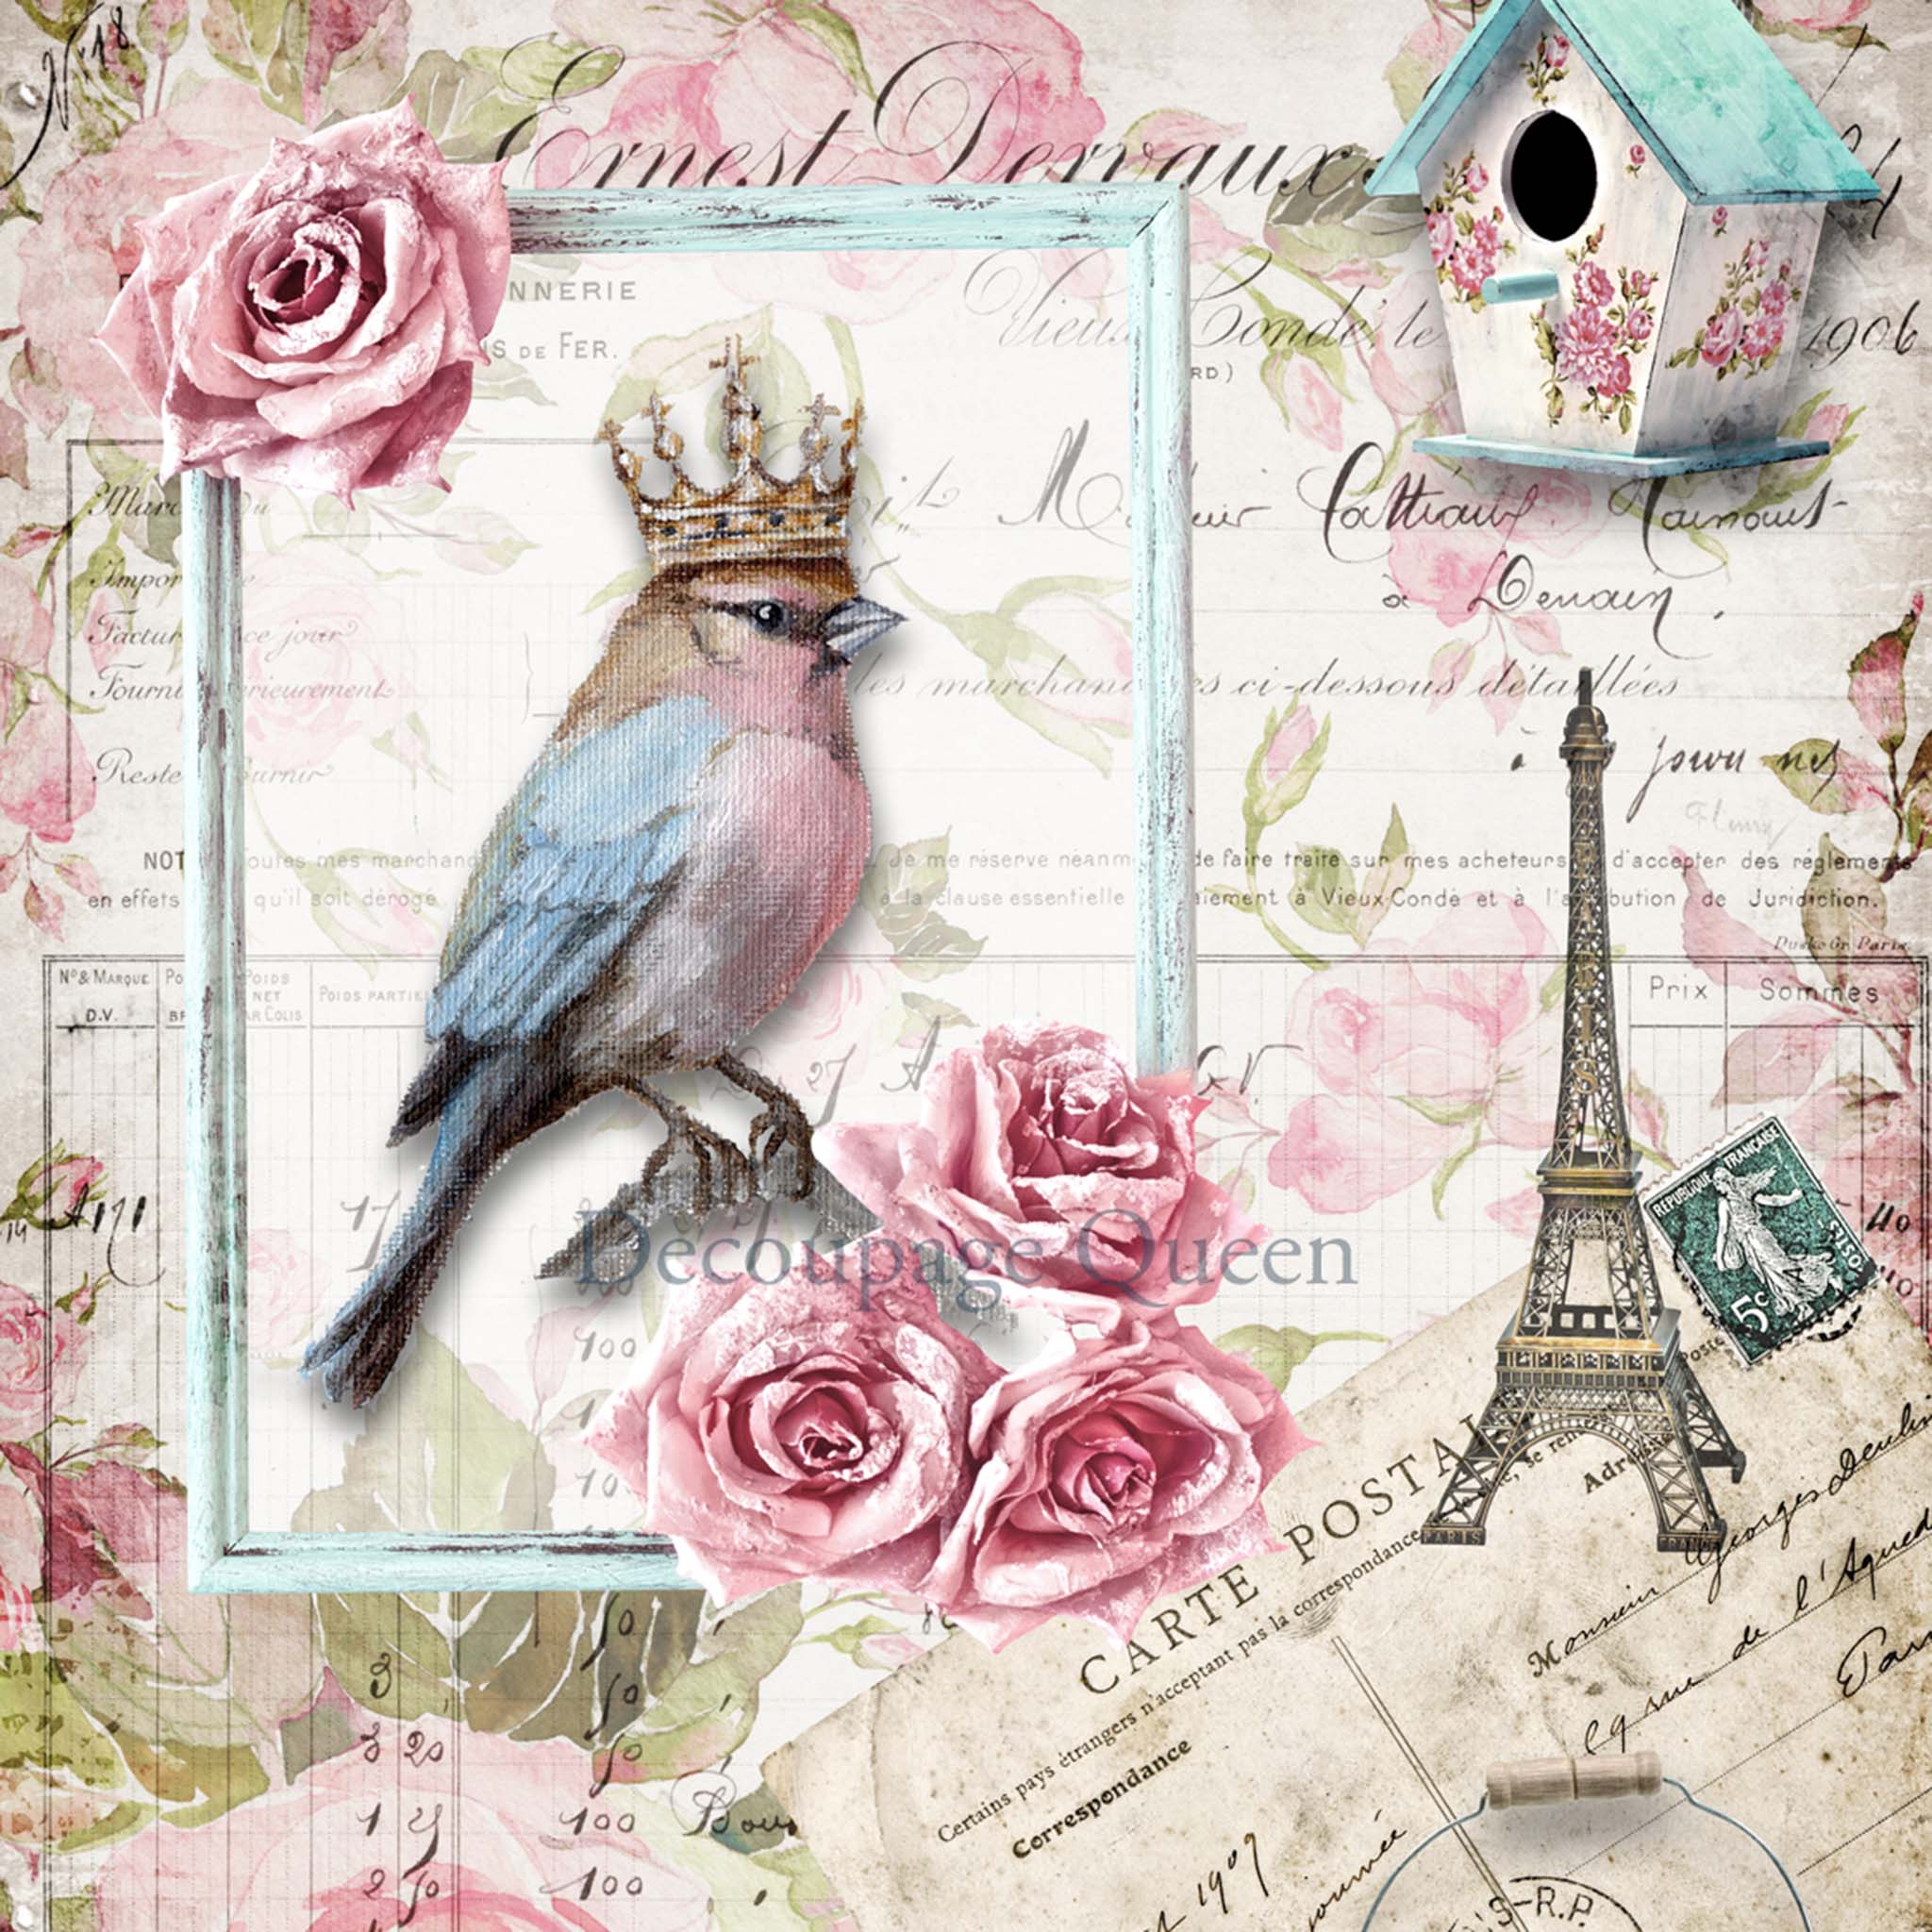 Close-up of an A0 rice paper design that features a small bird wearing a crown perched in a picture frame, surrounded by iconic Parisian elements like the Eiffel Tower, a birdhouse, and a French postcard against a floral background.